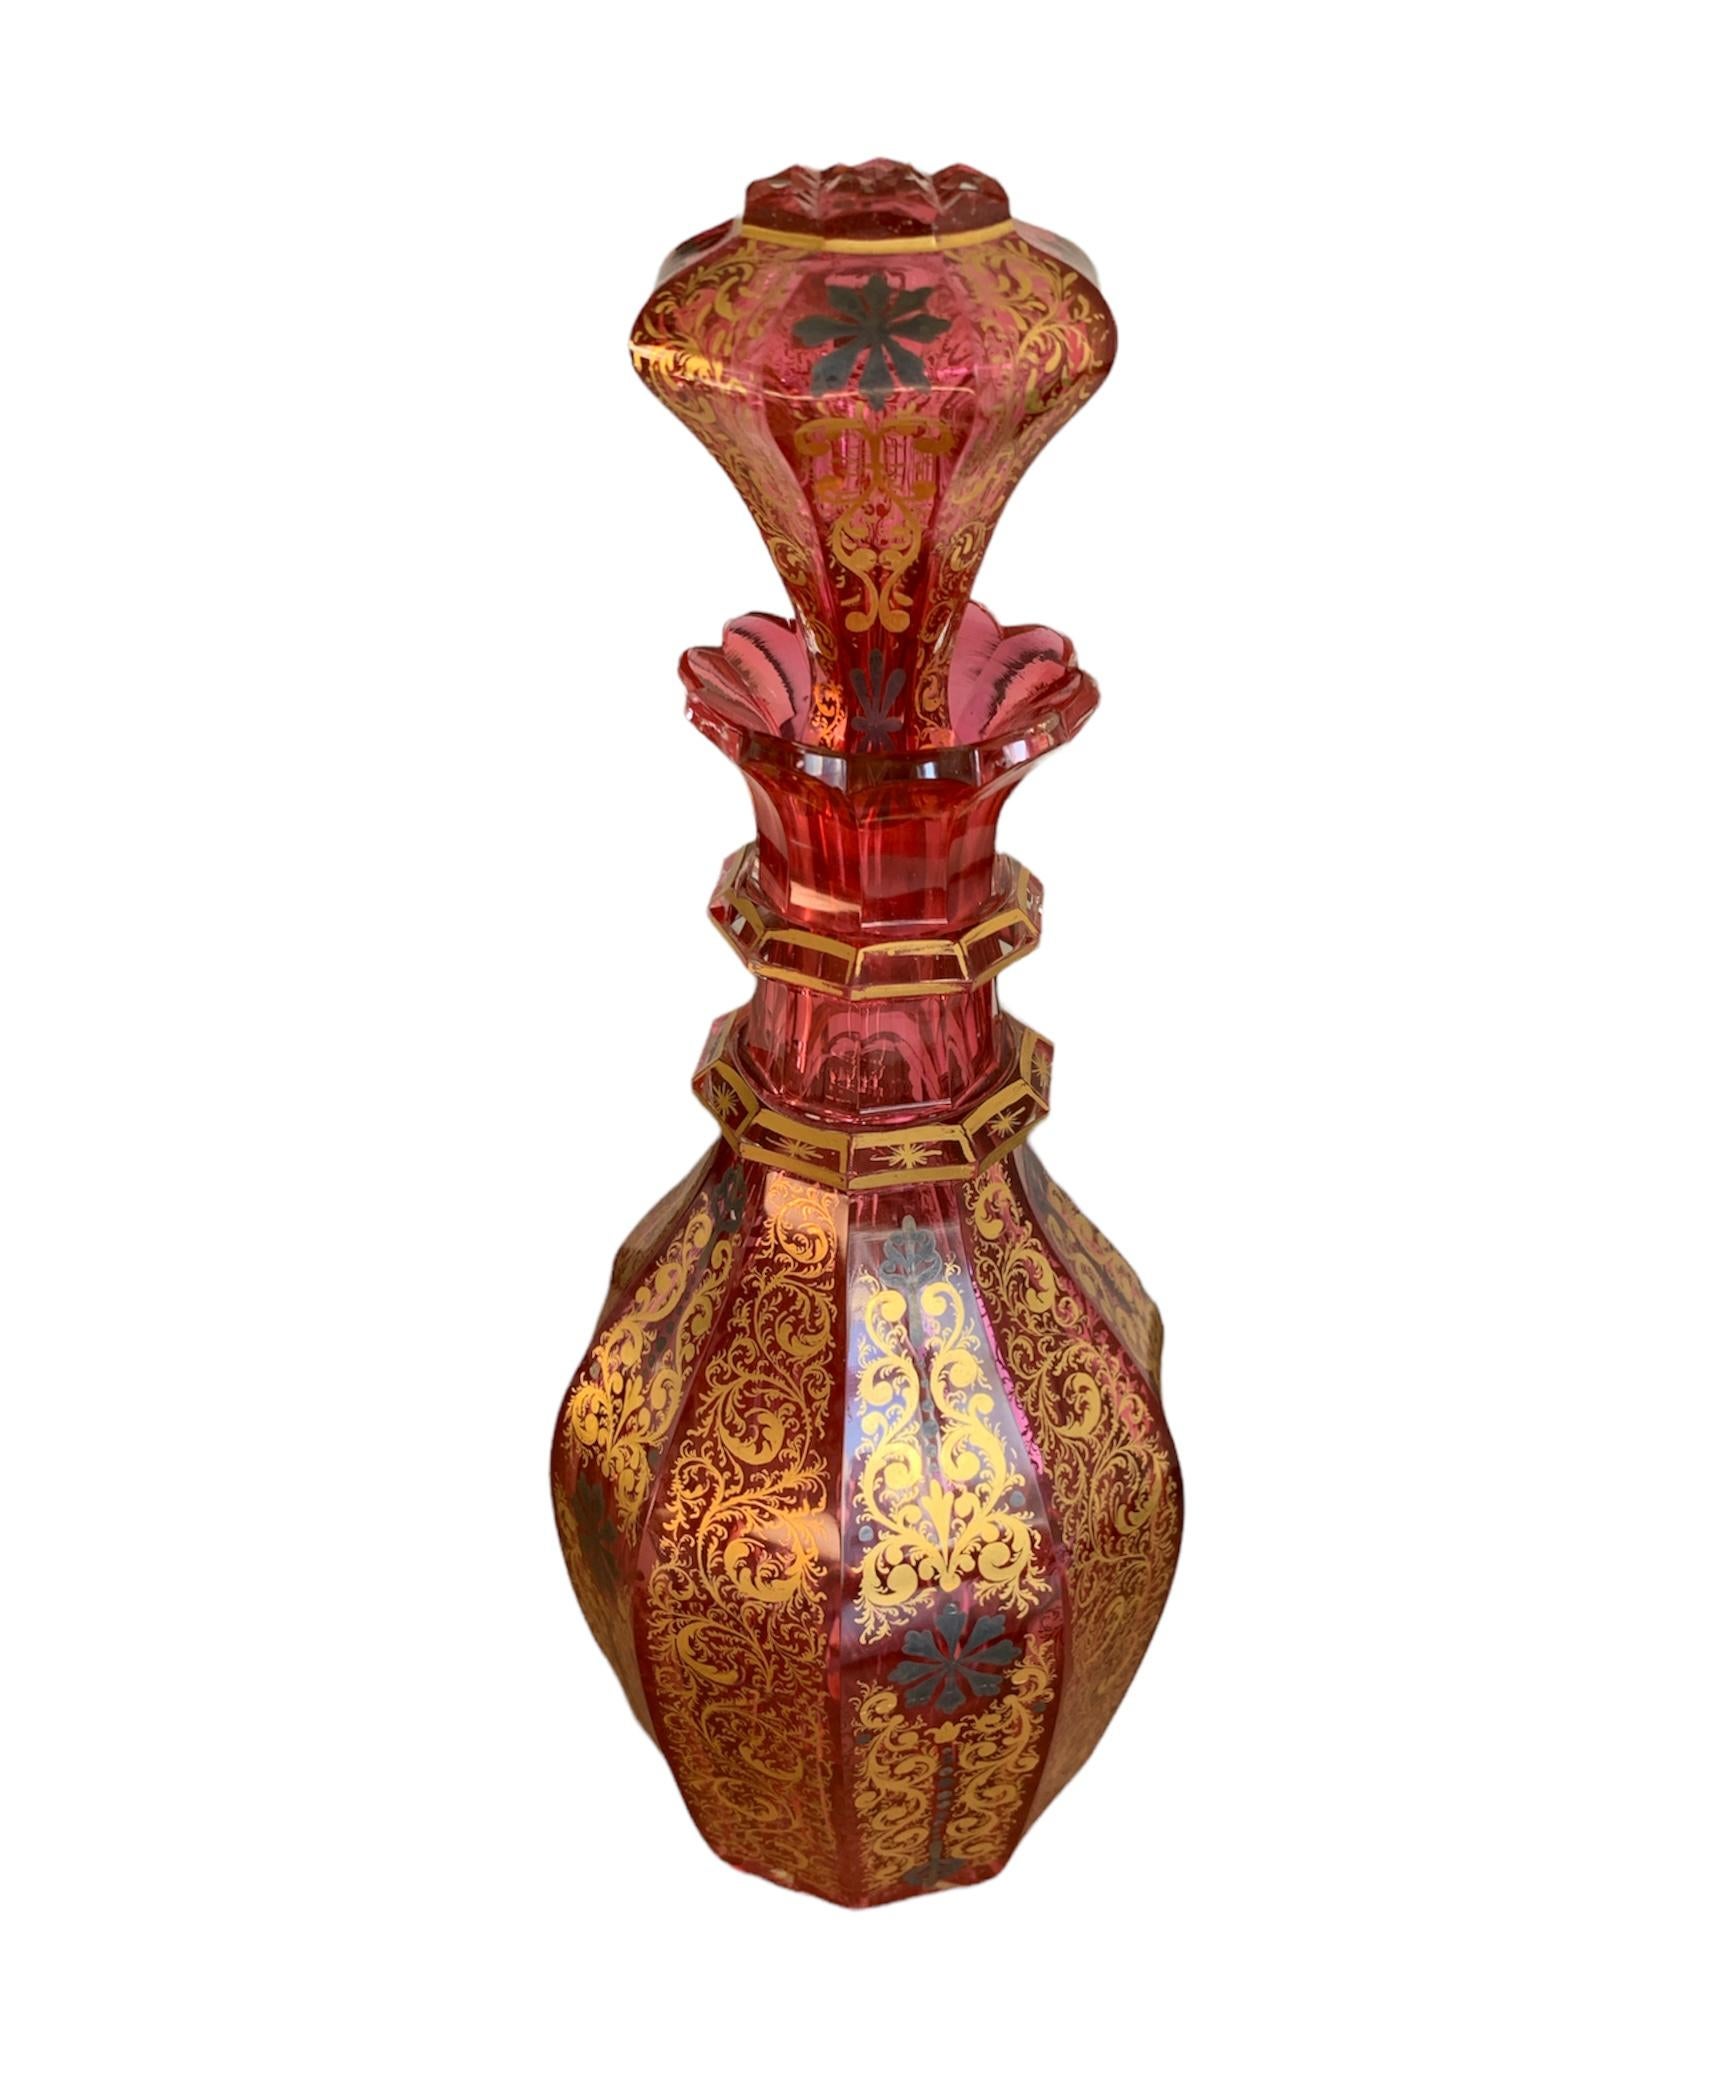 A very unusual and exquisite 19th century Bohemian crystal carafe with its original stopper. Red cranberry glass with rich gold decoration. This rare carafe shows the highest quality of the 19th century Bohemian glass artists. The body is decorated